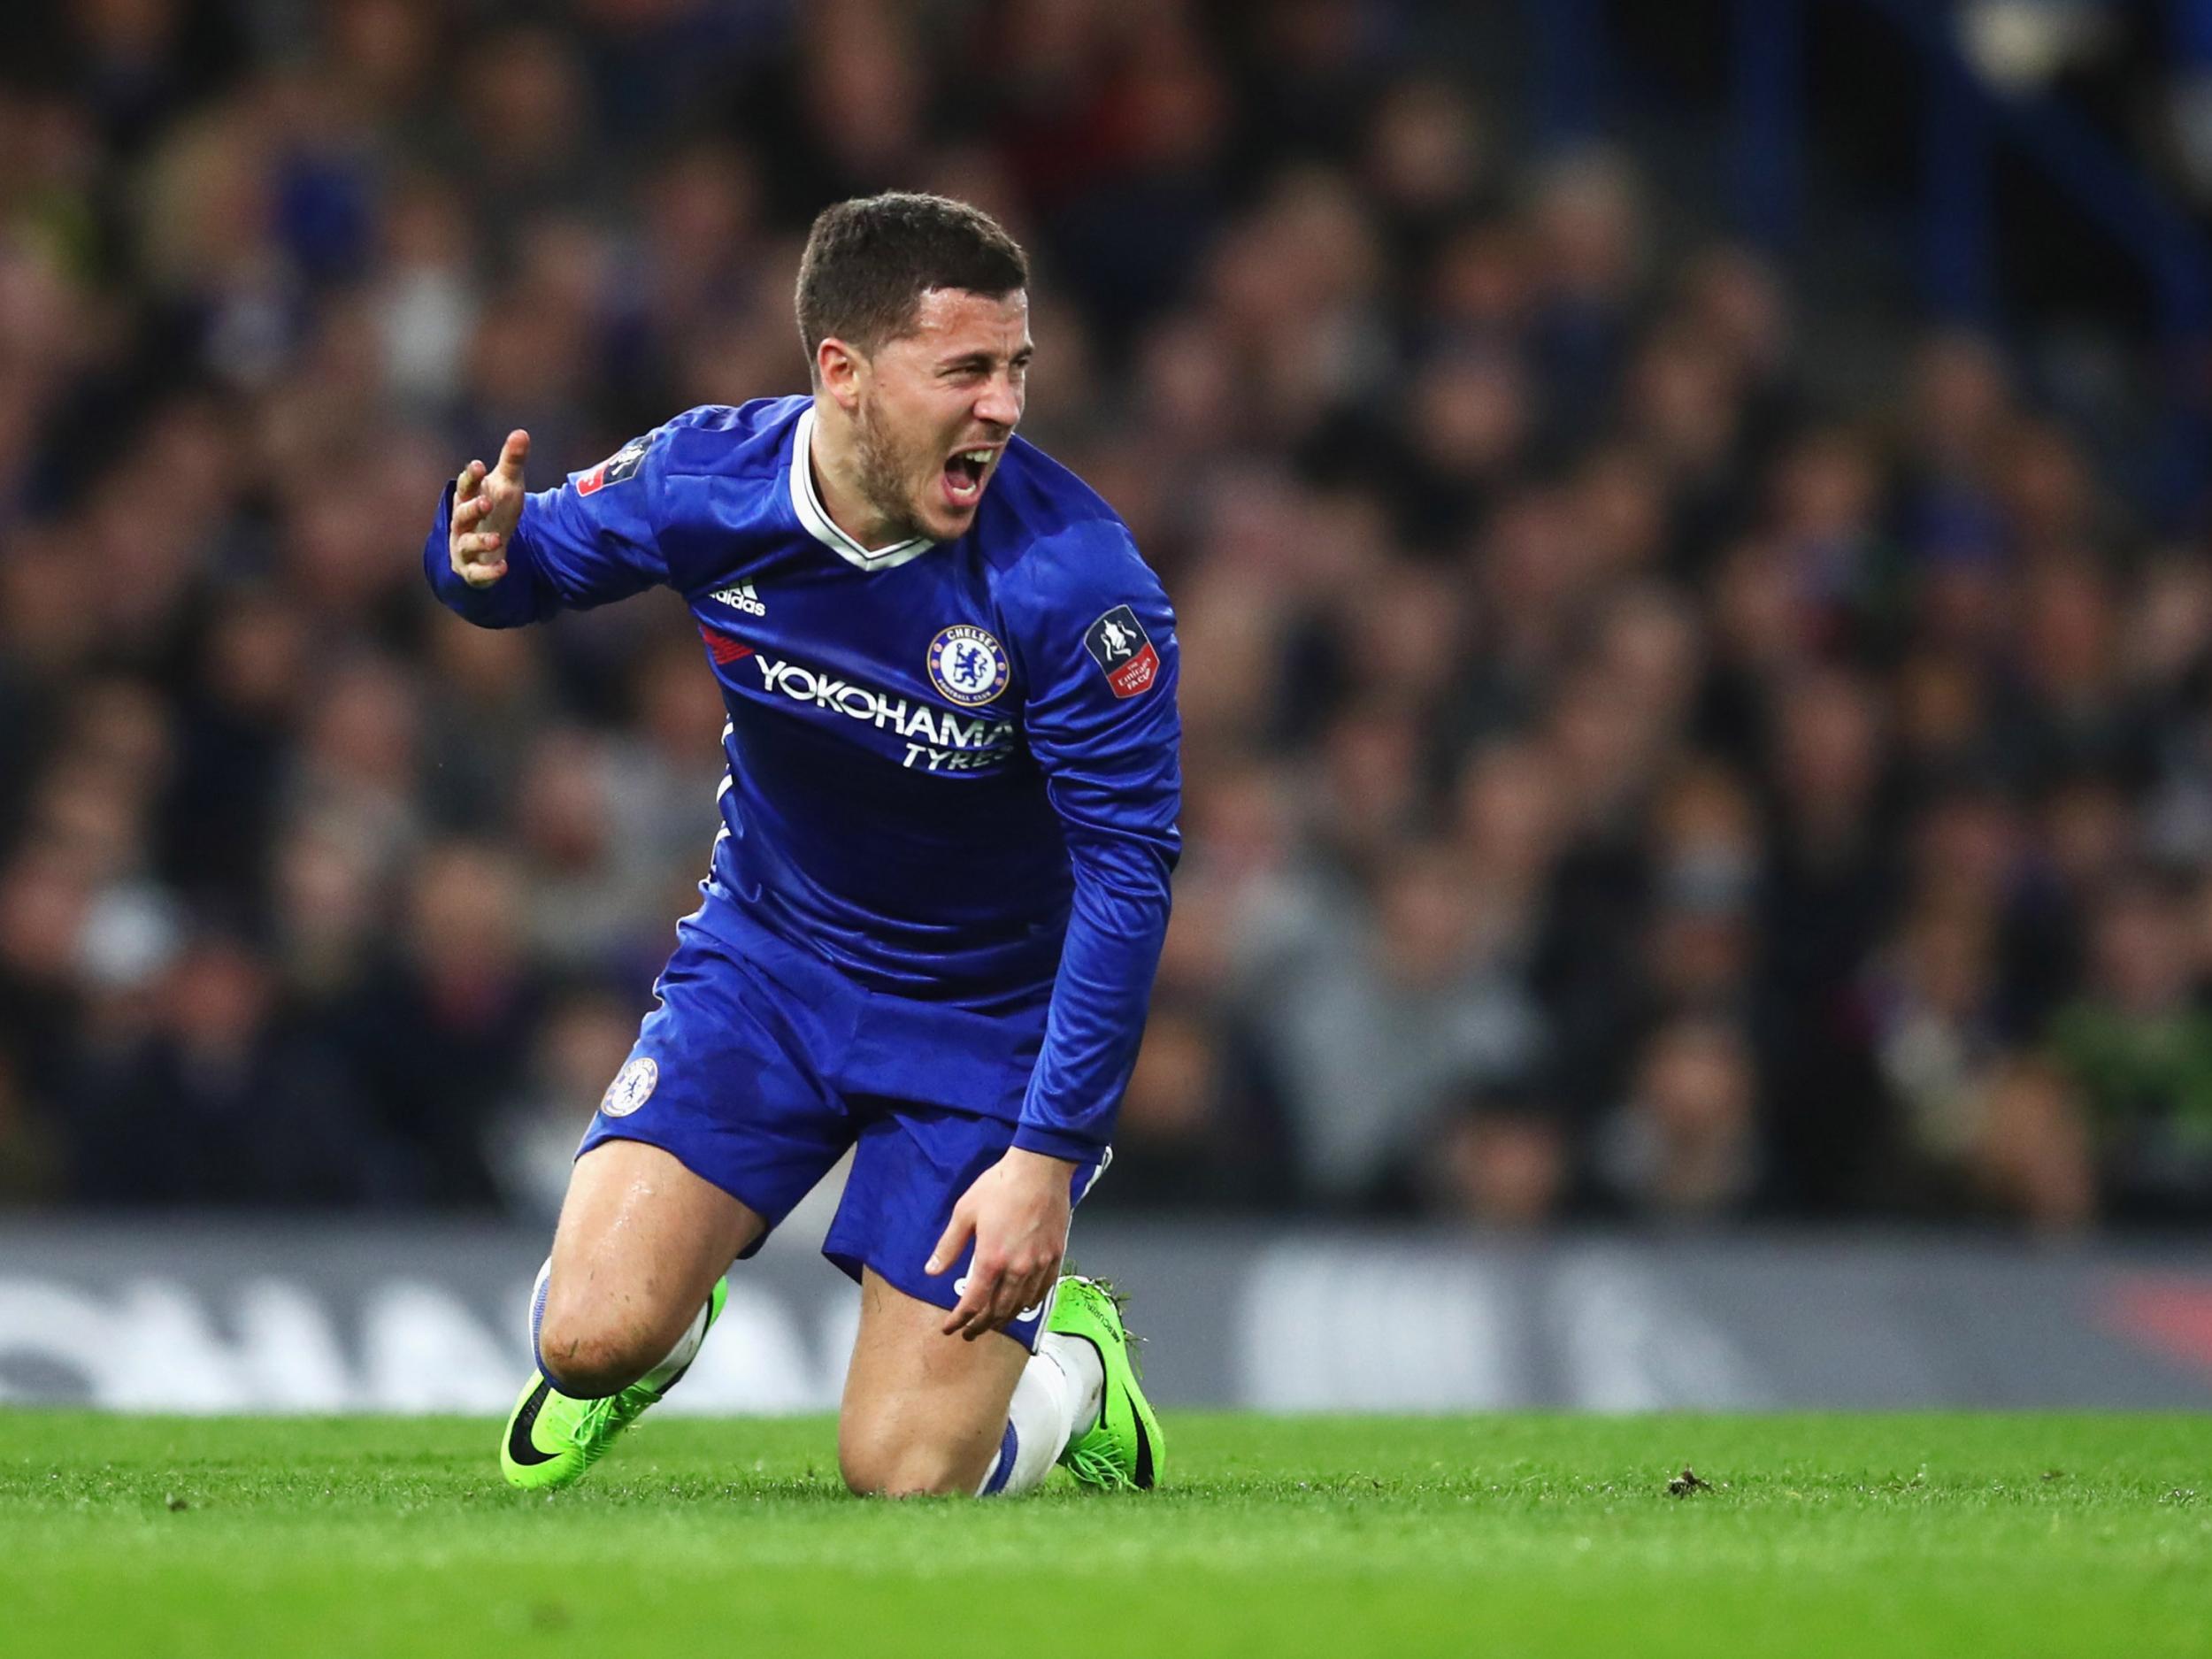 Hazard was kicked by United's players all evening